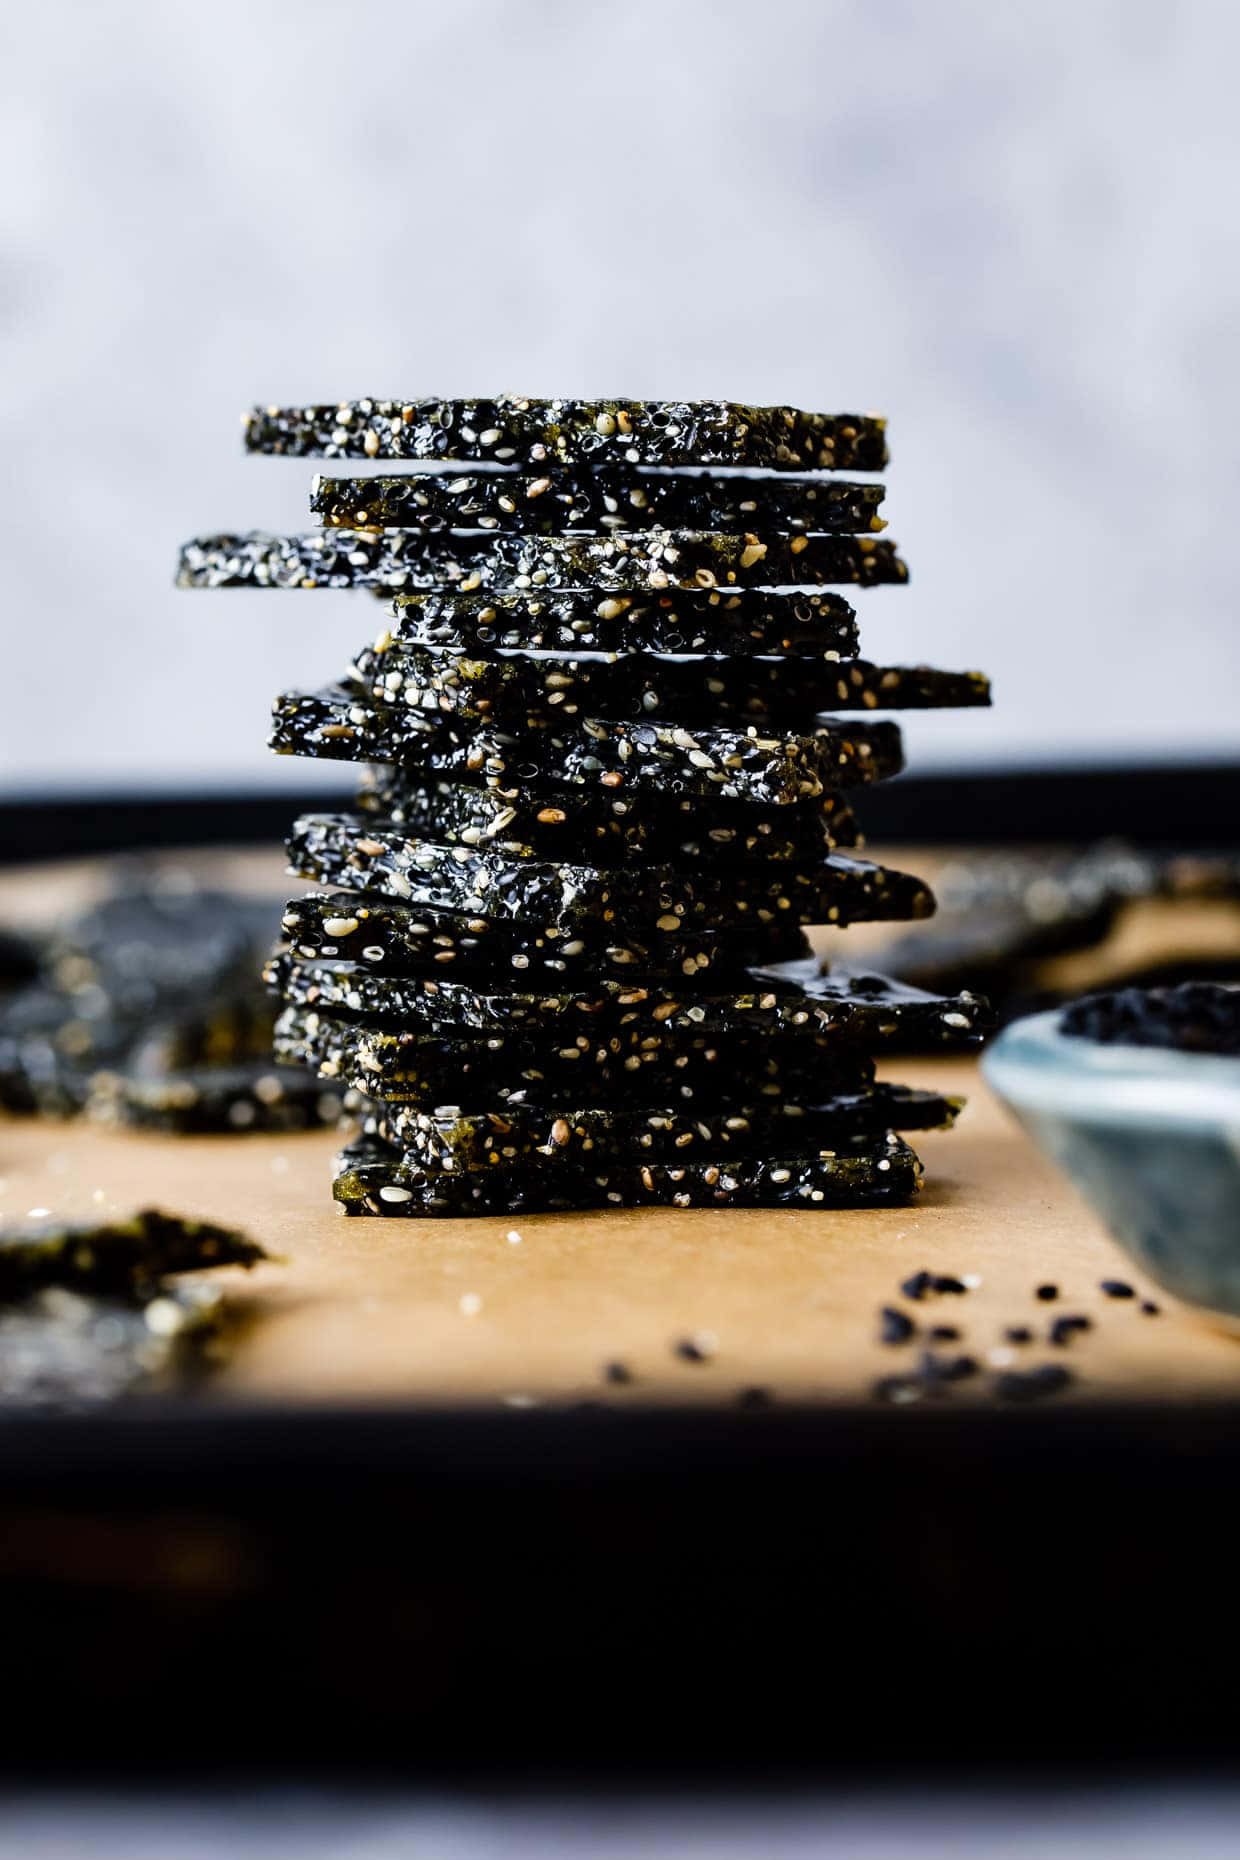 A spoonful of black sesame, a powerful superfood with a plethora of health benefits Wallpaper